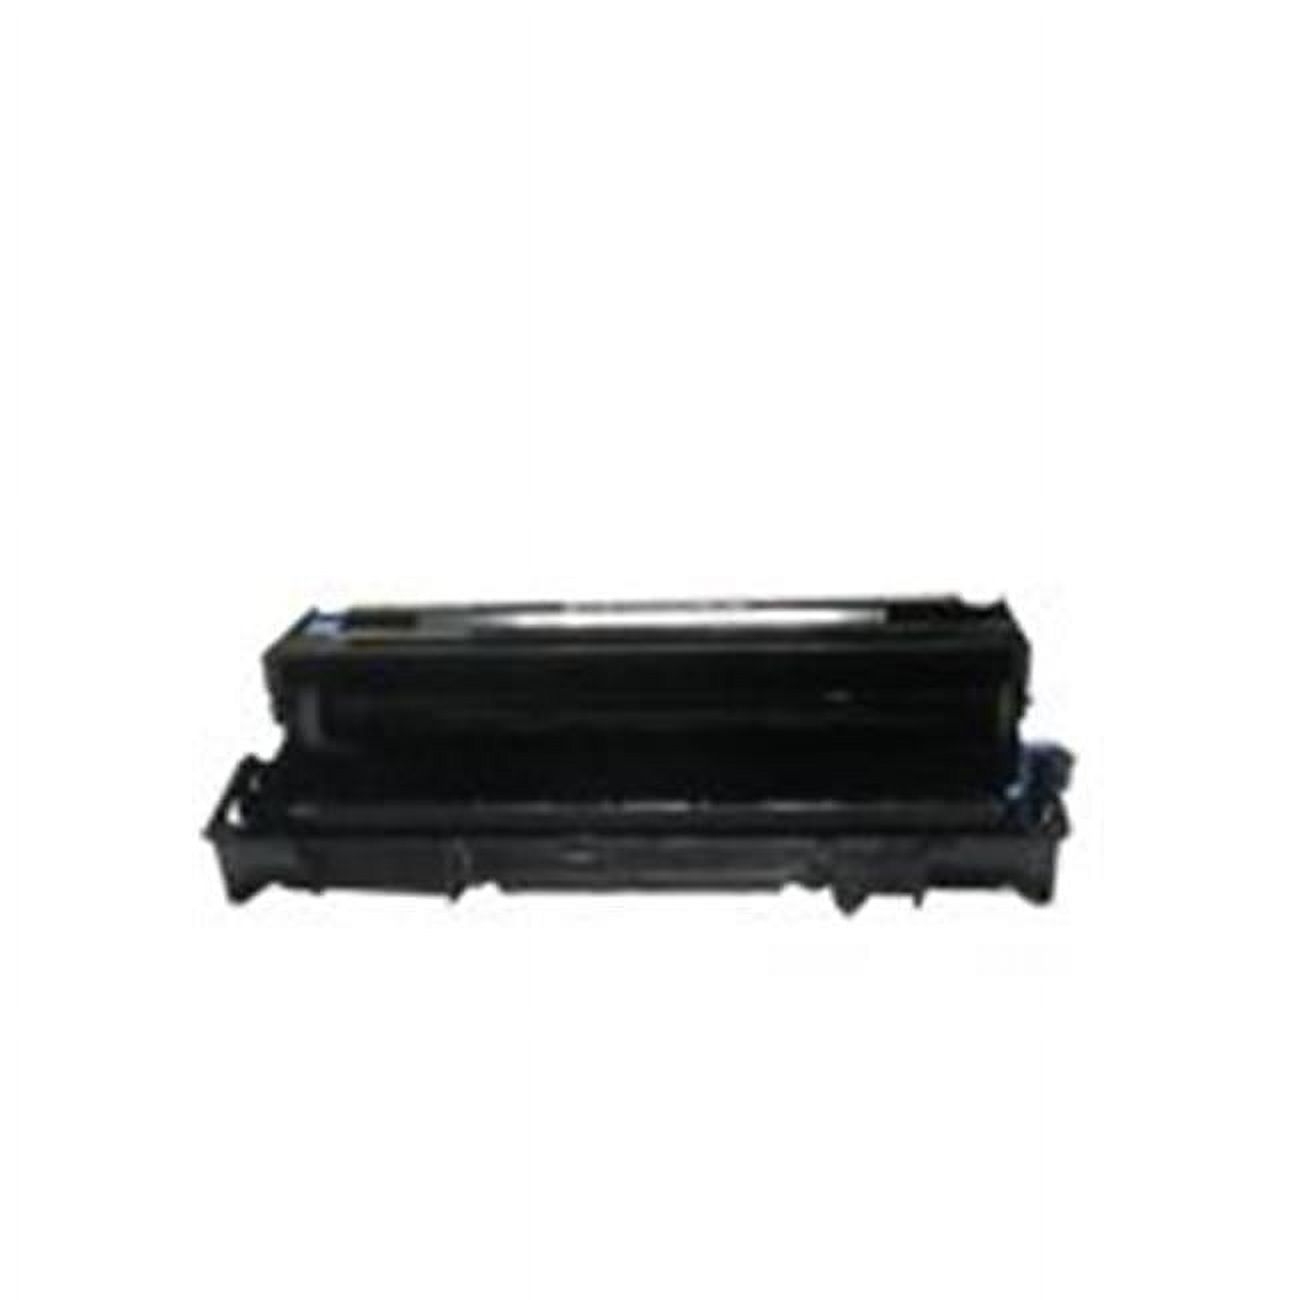 Replacement Drum Unit DR-400 - image 1 of 1